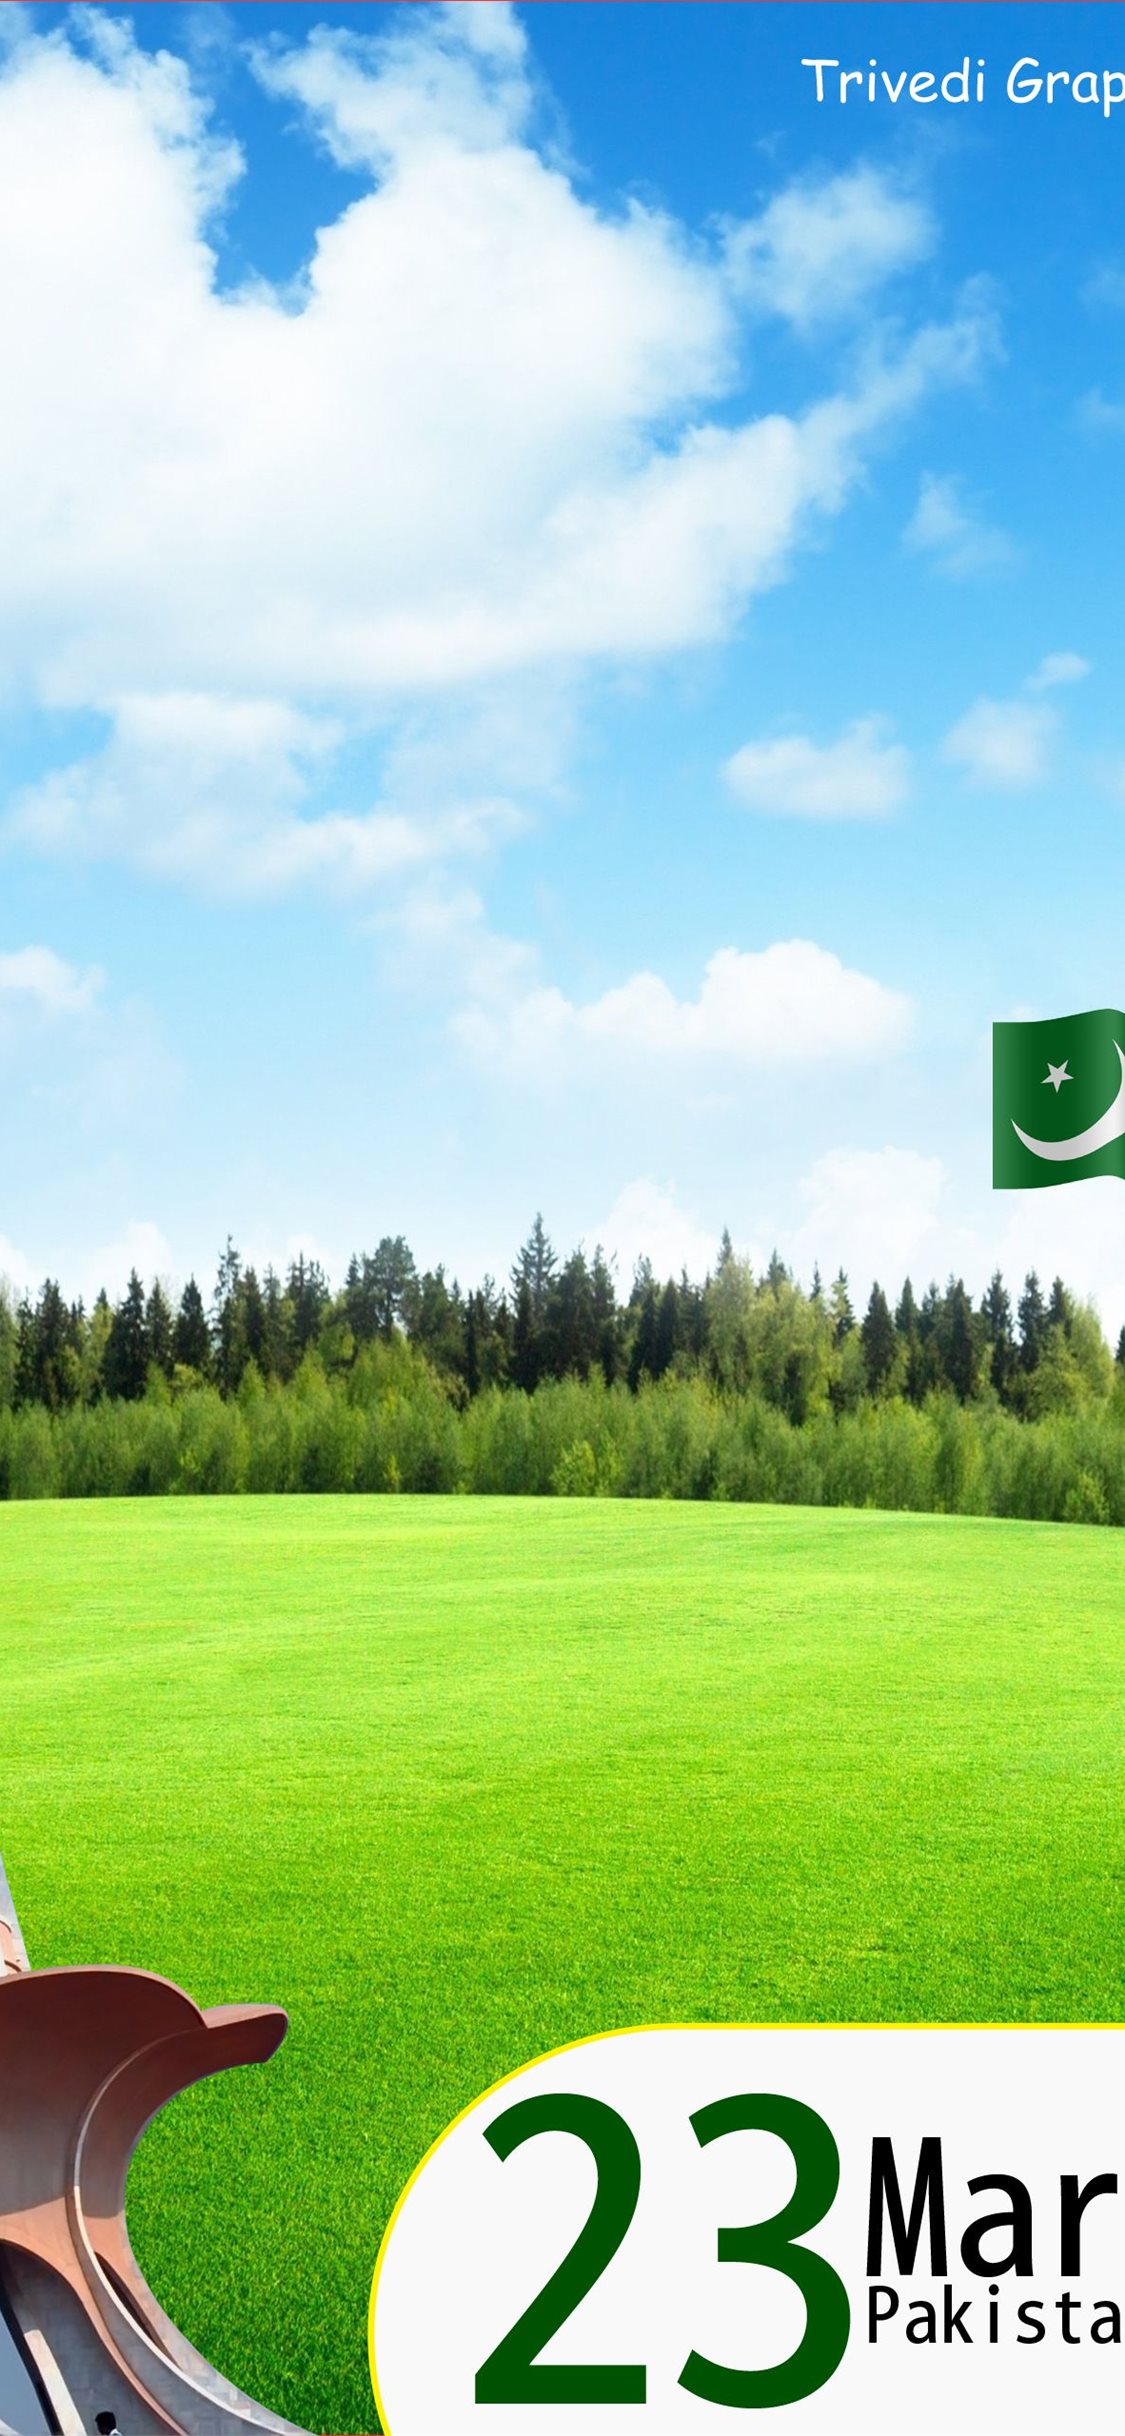 Pakistan flag country waving blue sky background wallpaper sign symbol  decoration freedom national government independence emblem politic asia  travel islam muslim religion culture pride3d render 20311293 Stock Photo  at Vecteezy